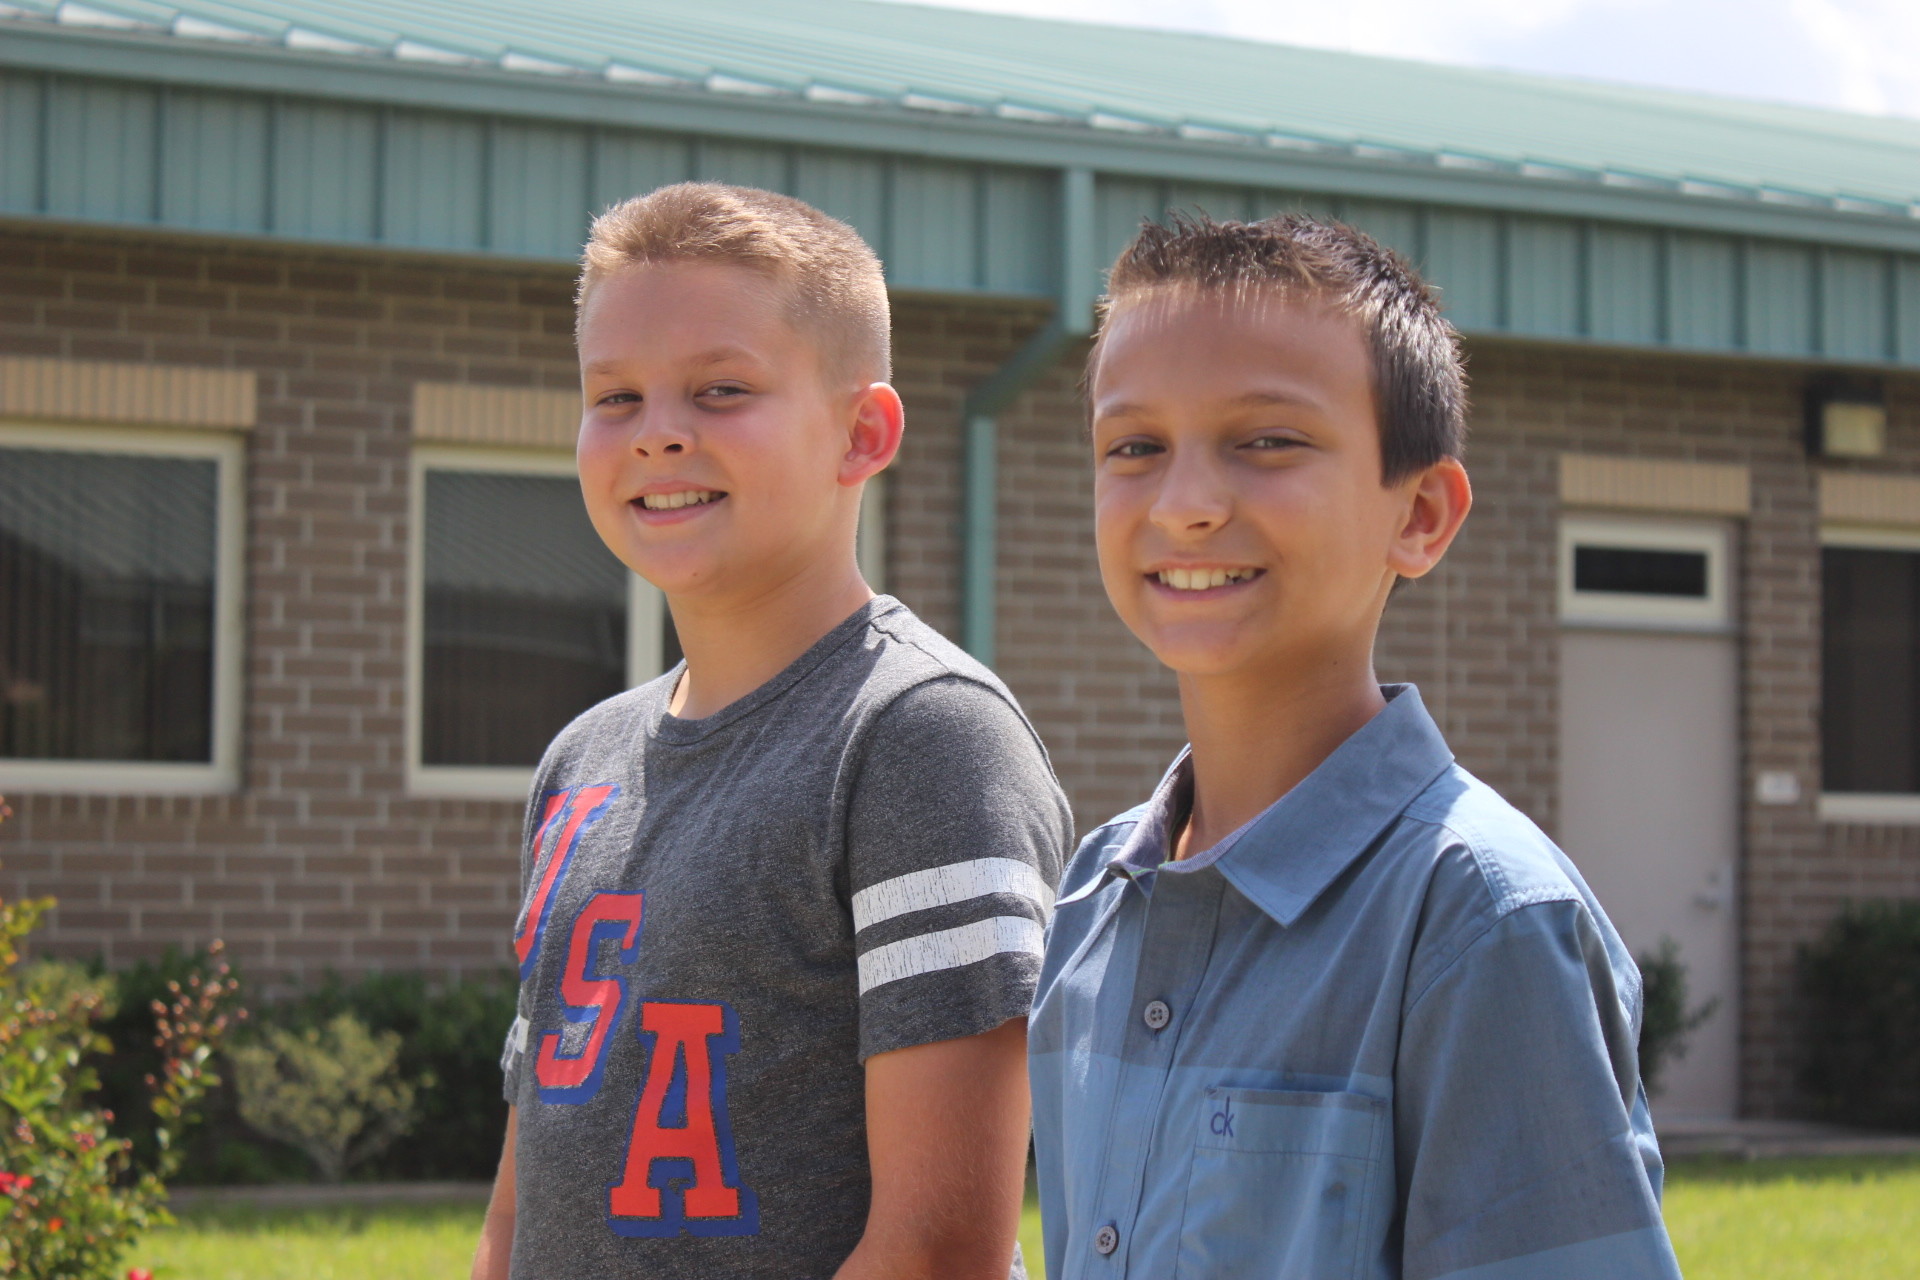 From left, Nate Helmuth and Isaac Davis, both 11, stand at the same pole they folded the United States flag at during an Aug. 17 rainstorm at Coppergate Elementary.